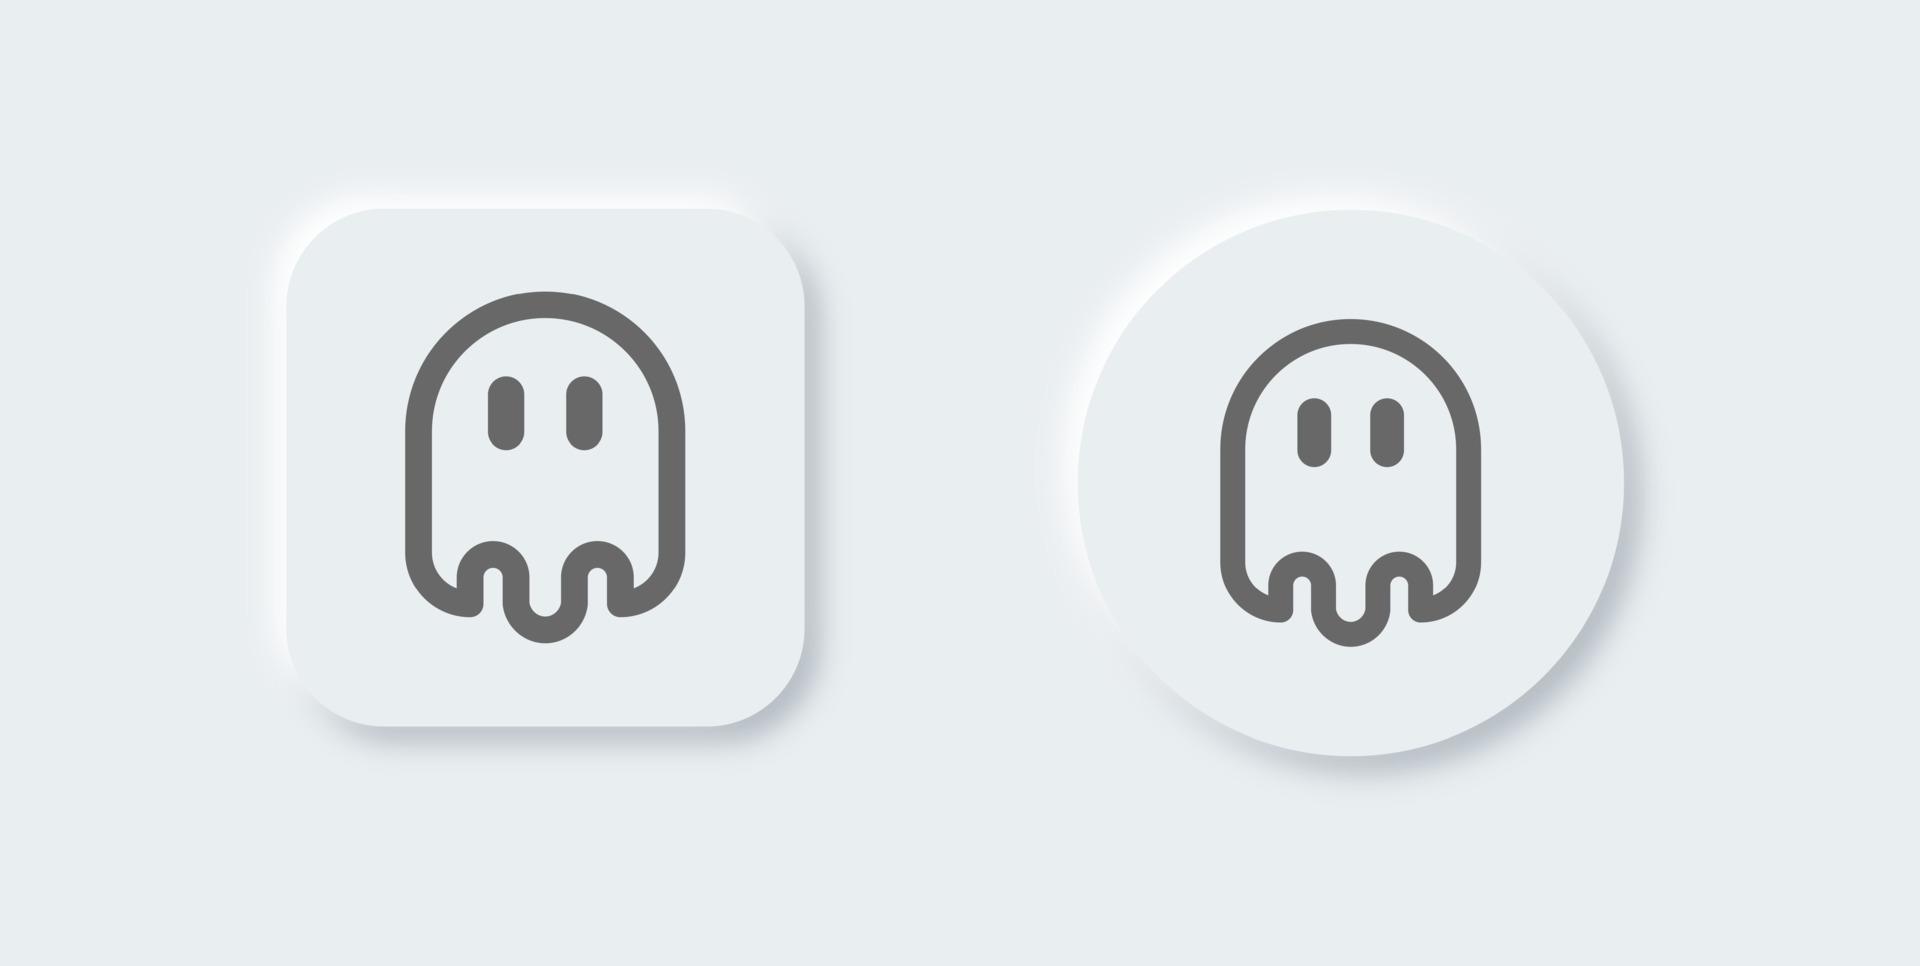 Ghost line icon in neomorphic design style. Spooky spirit signs vector illustration.